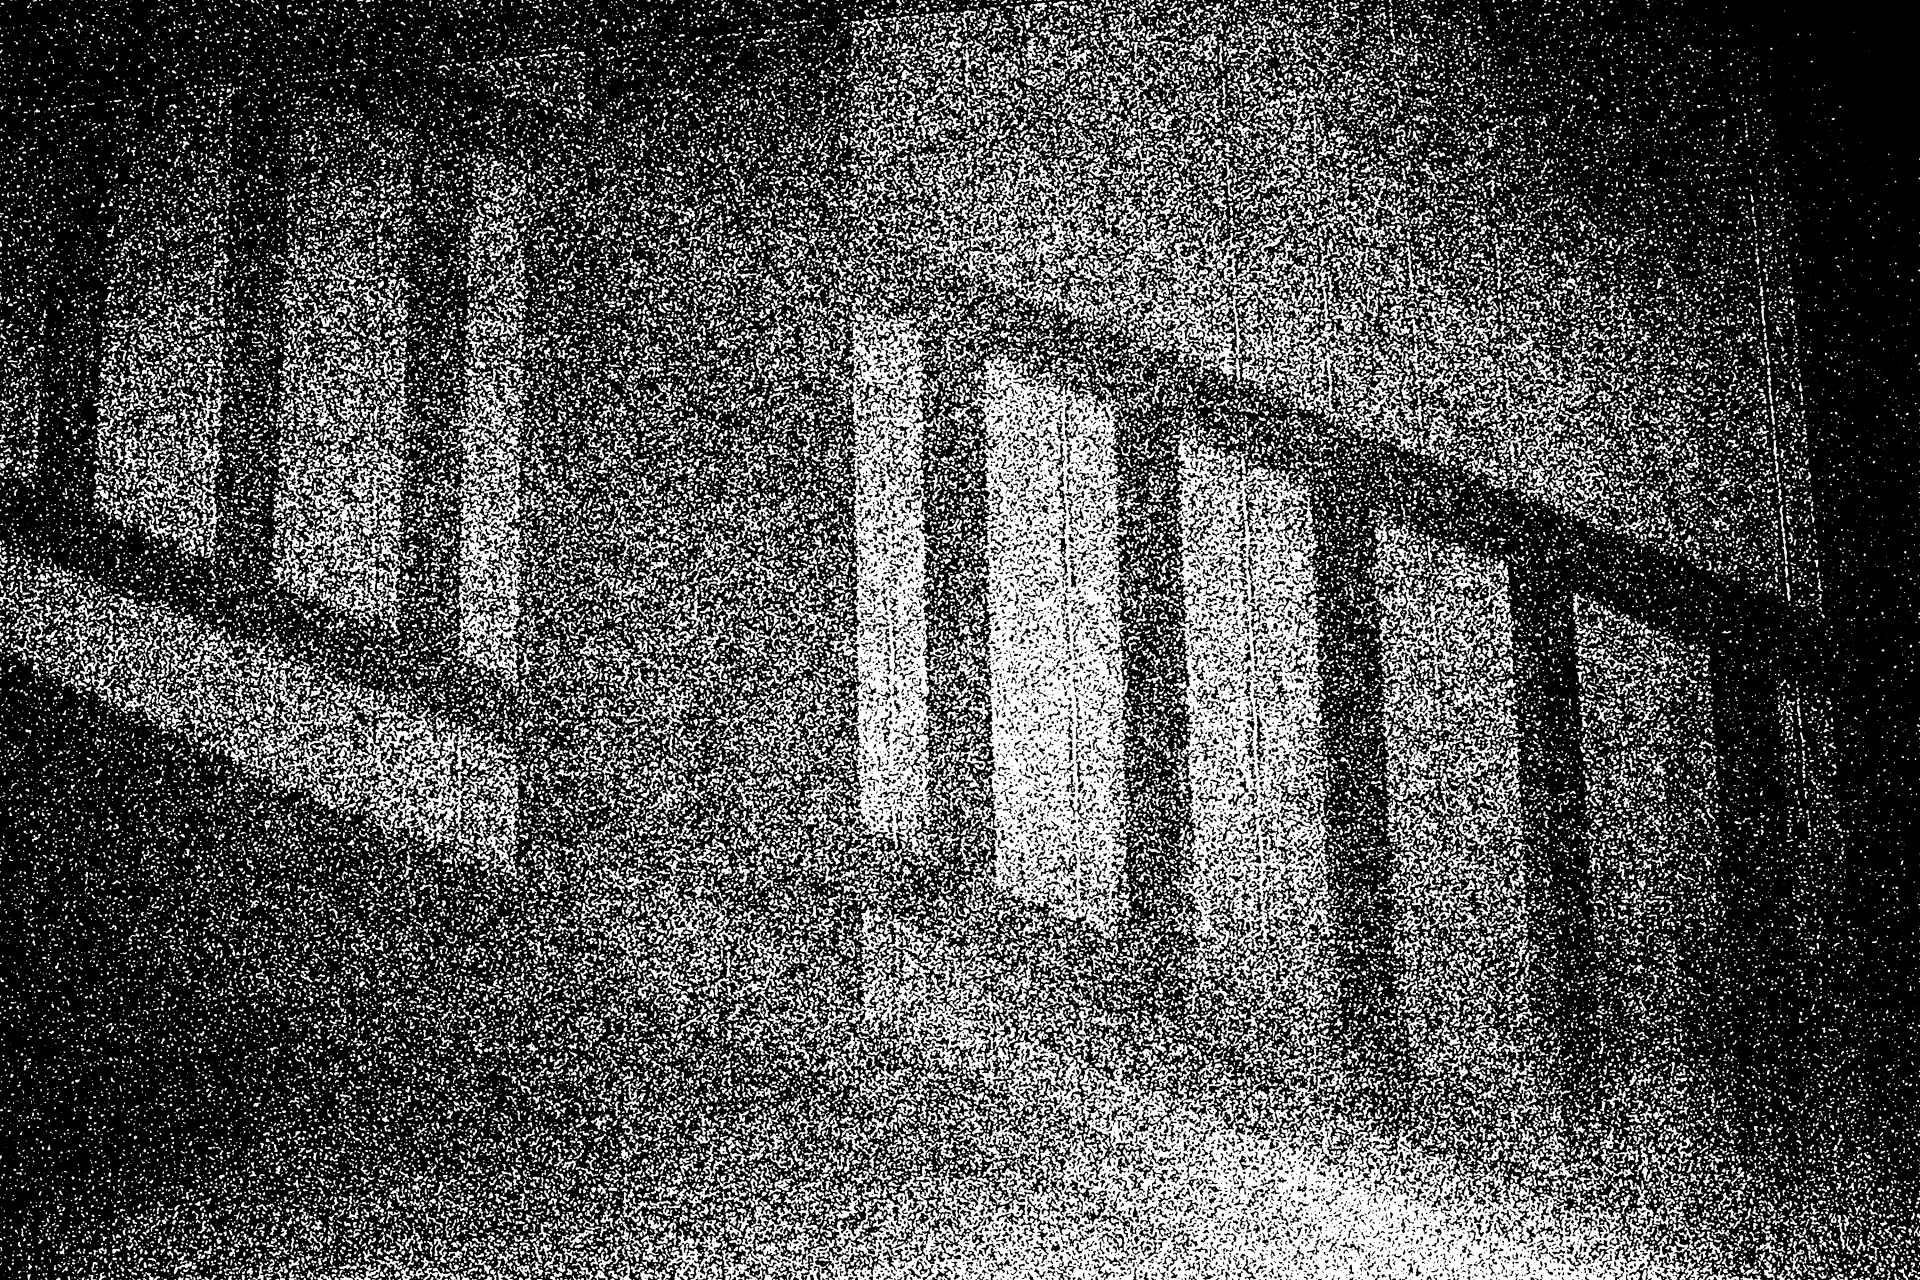 grainy-image-of-a-shadow.jpg